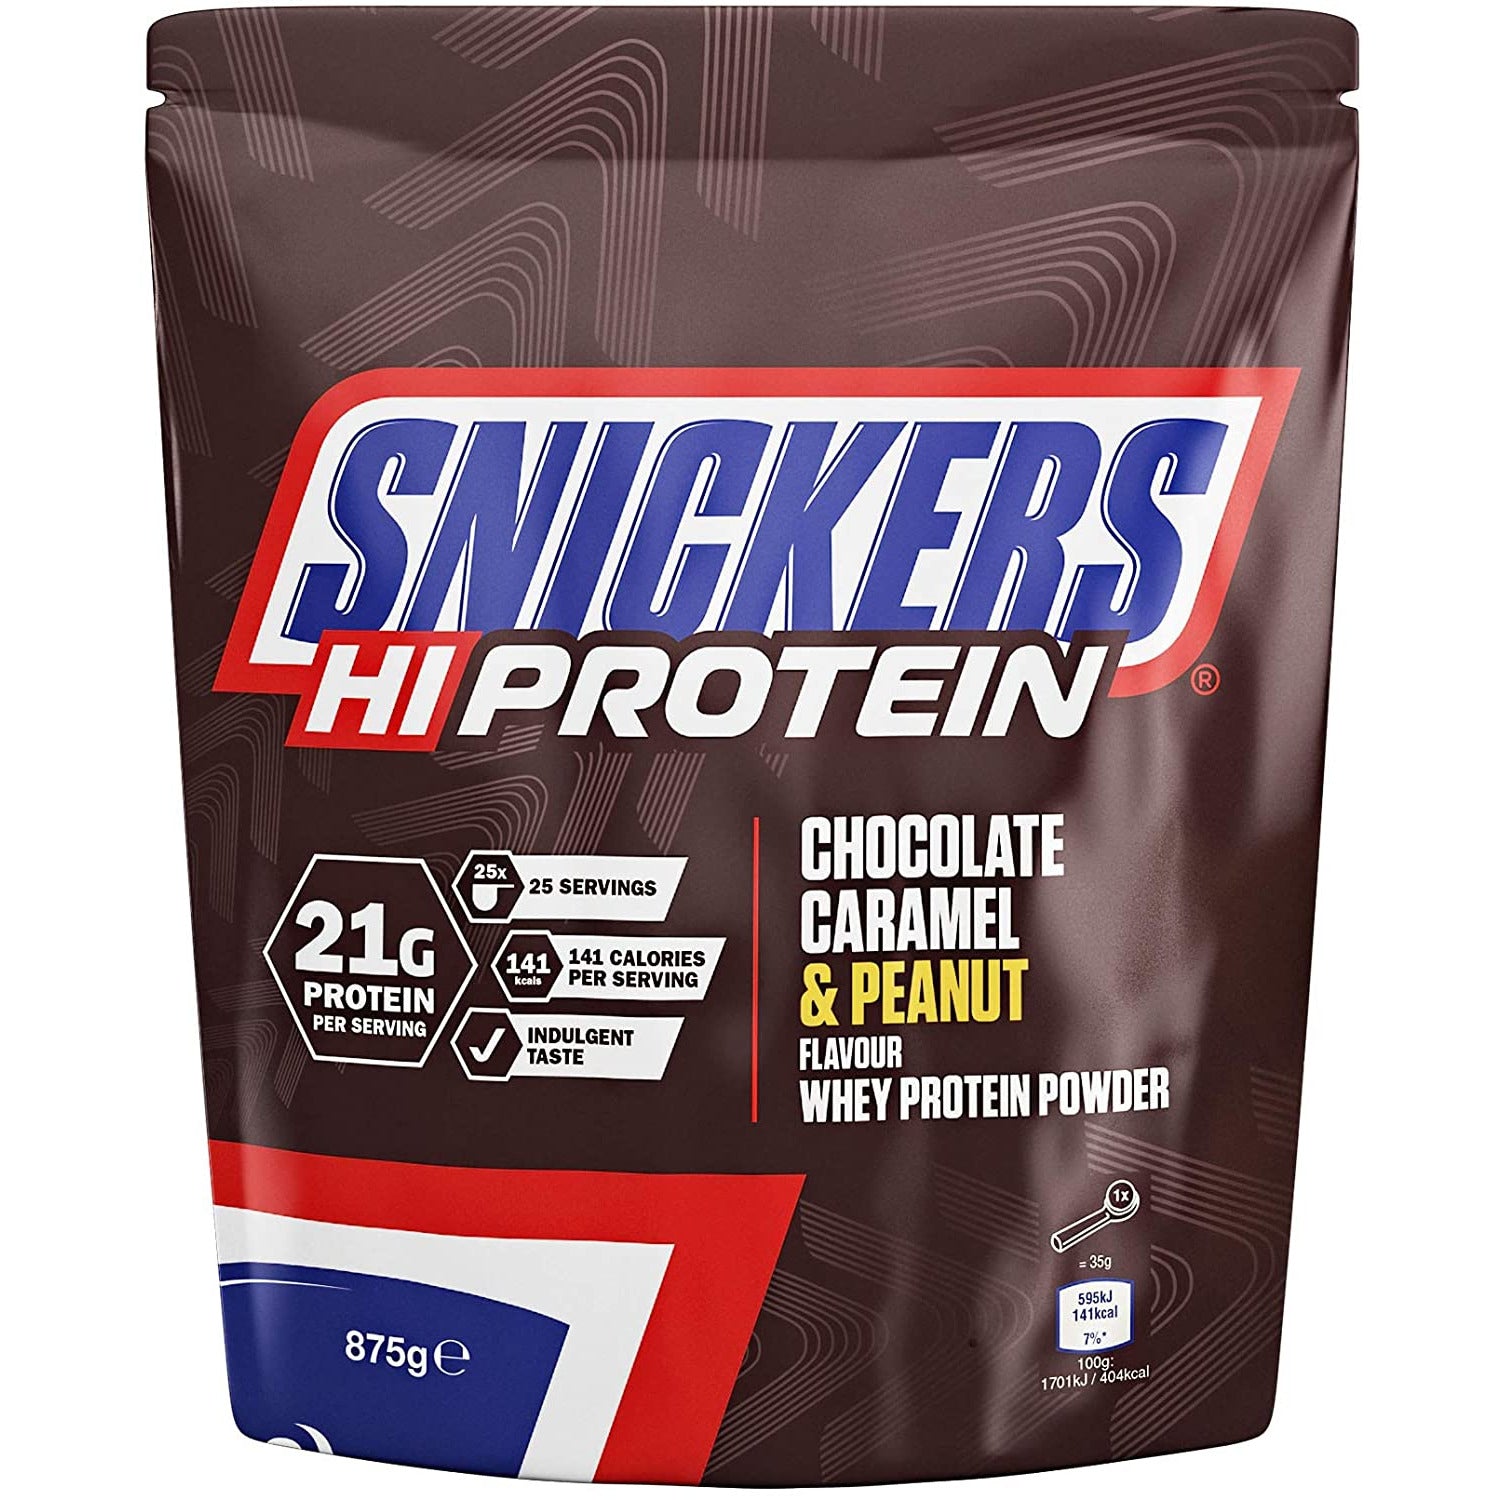 Snickers Hi Protein Chocolate, Caramel & Peanut Flavour 875g 25 Servings